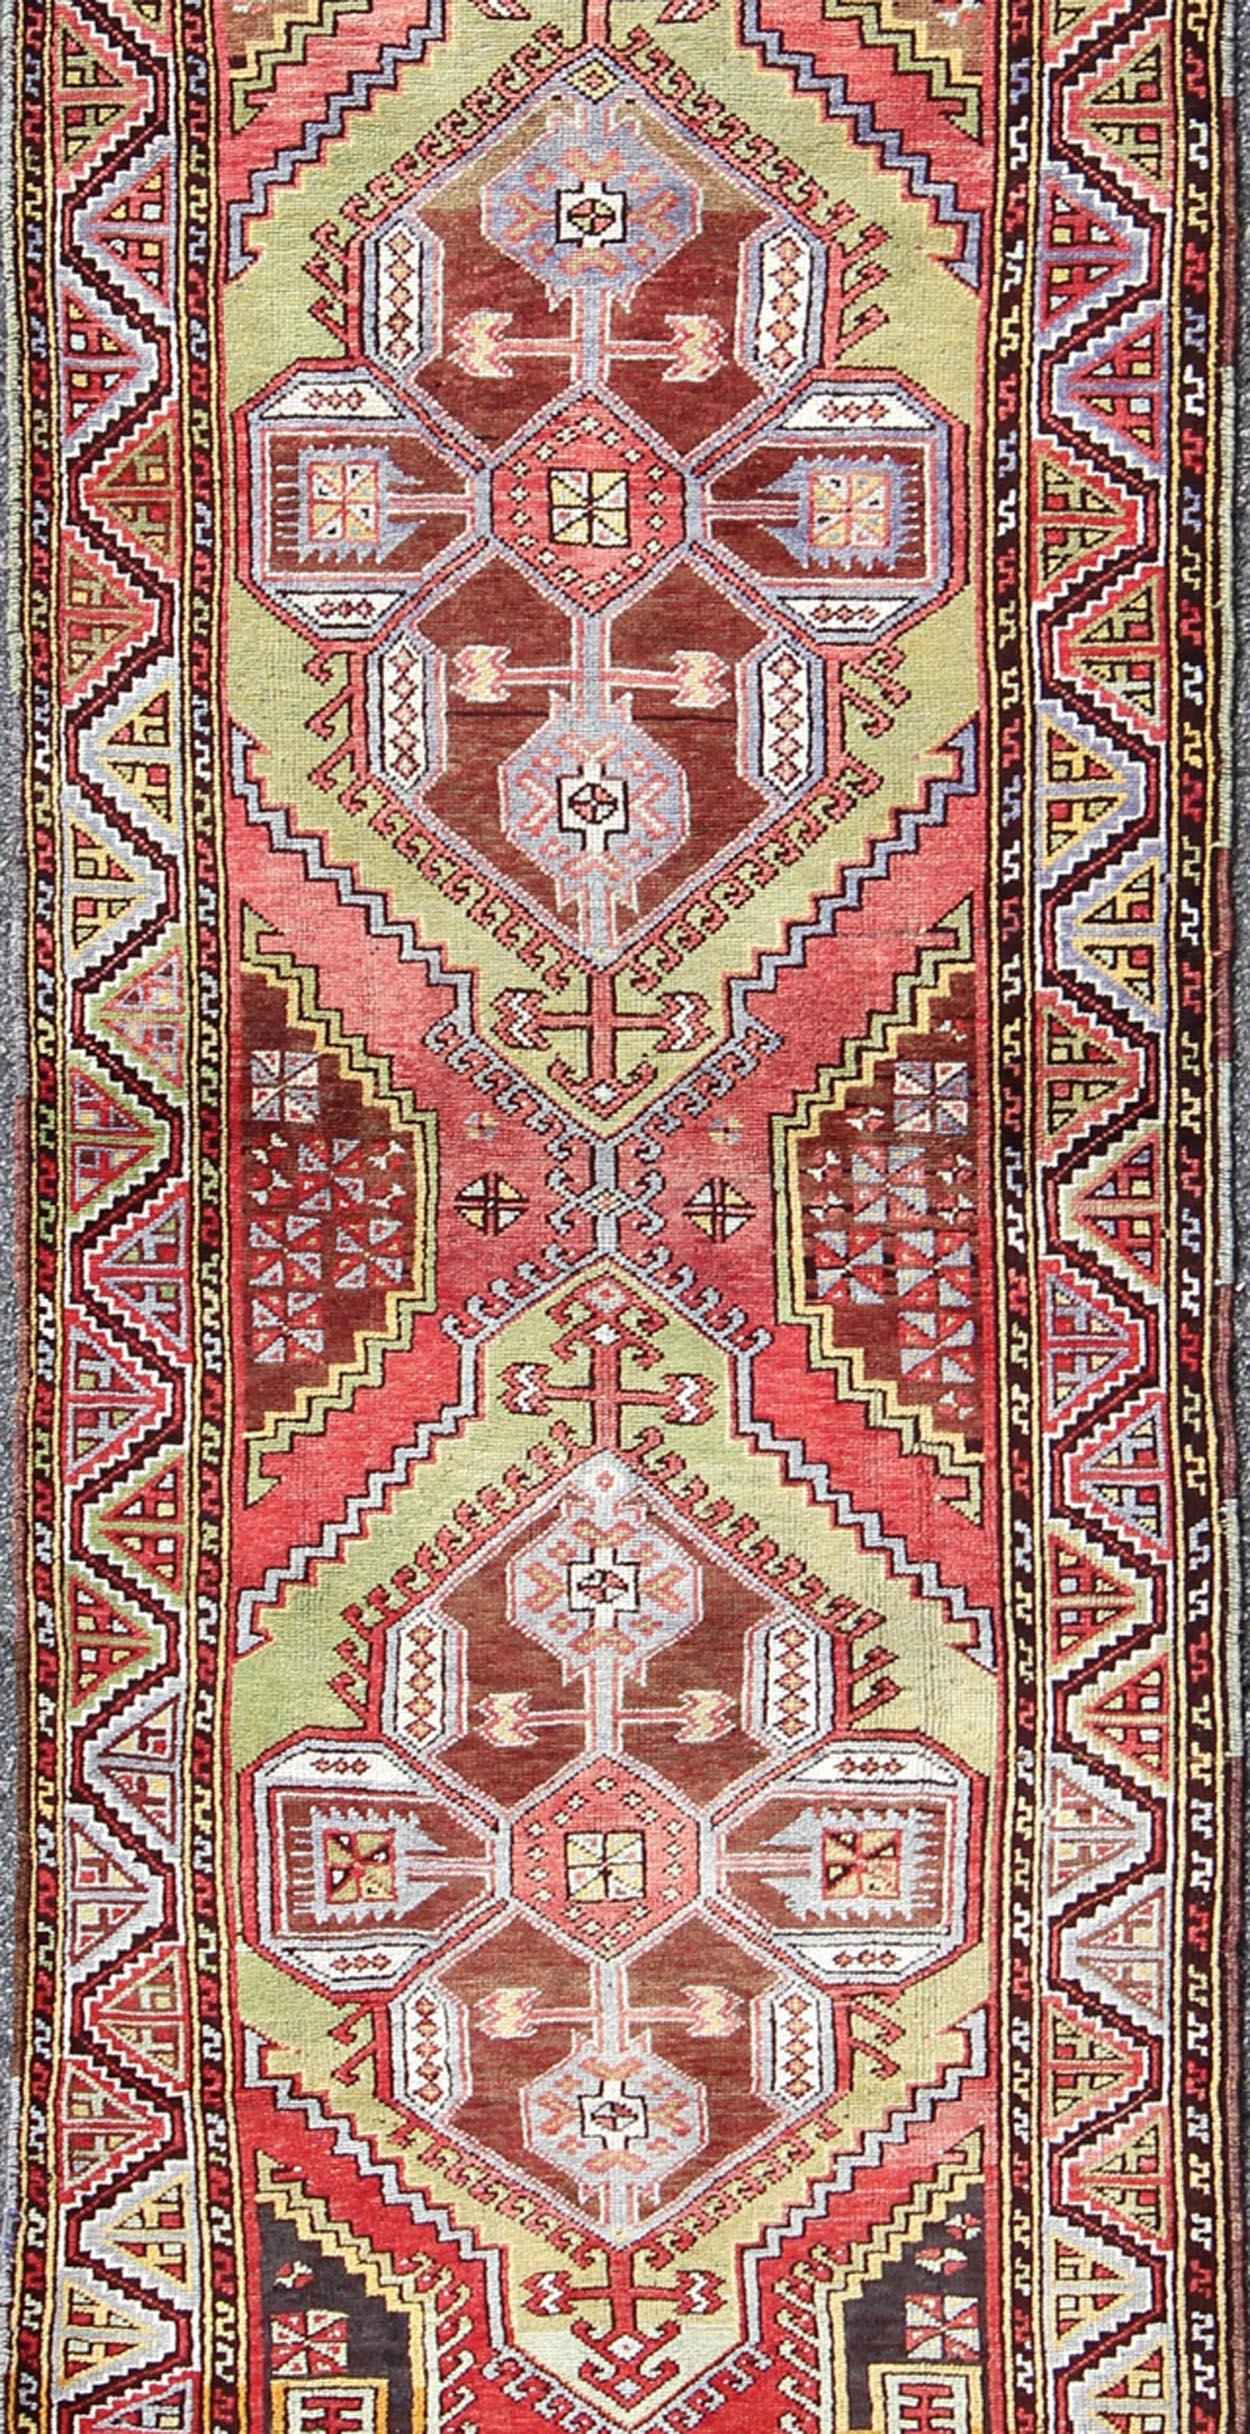 Measures: 3'7 x 10'10

This vintage (circa 1940's) Turkish Oushak runner features bright, vibrant spring colors, such as rose red, grassy green, lavender, blue, and pink. The border hails a tribal zig-zag design, while the field displays large,